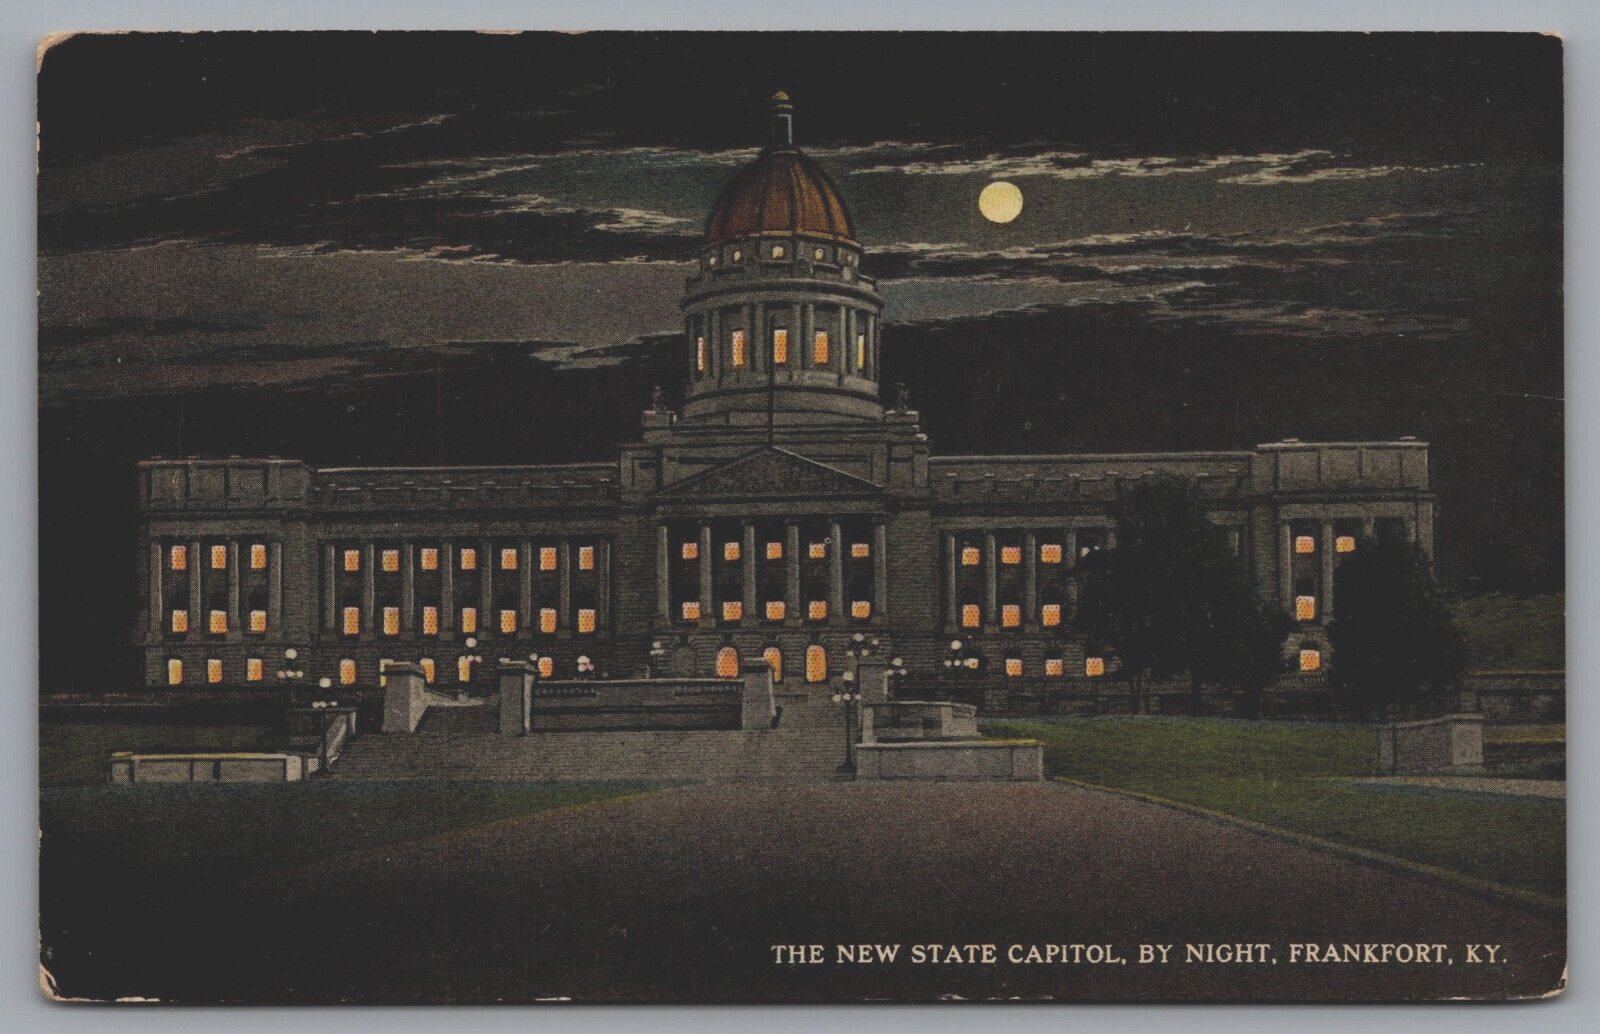 The New State Capitol By Night Frankfort Building KY Kentucky Vintage Postcard